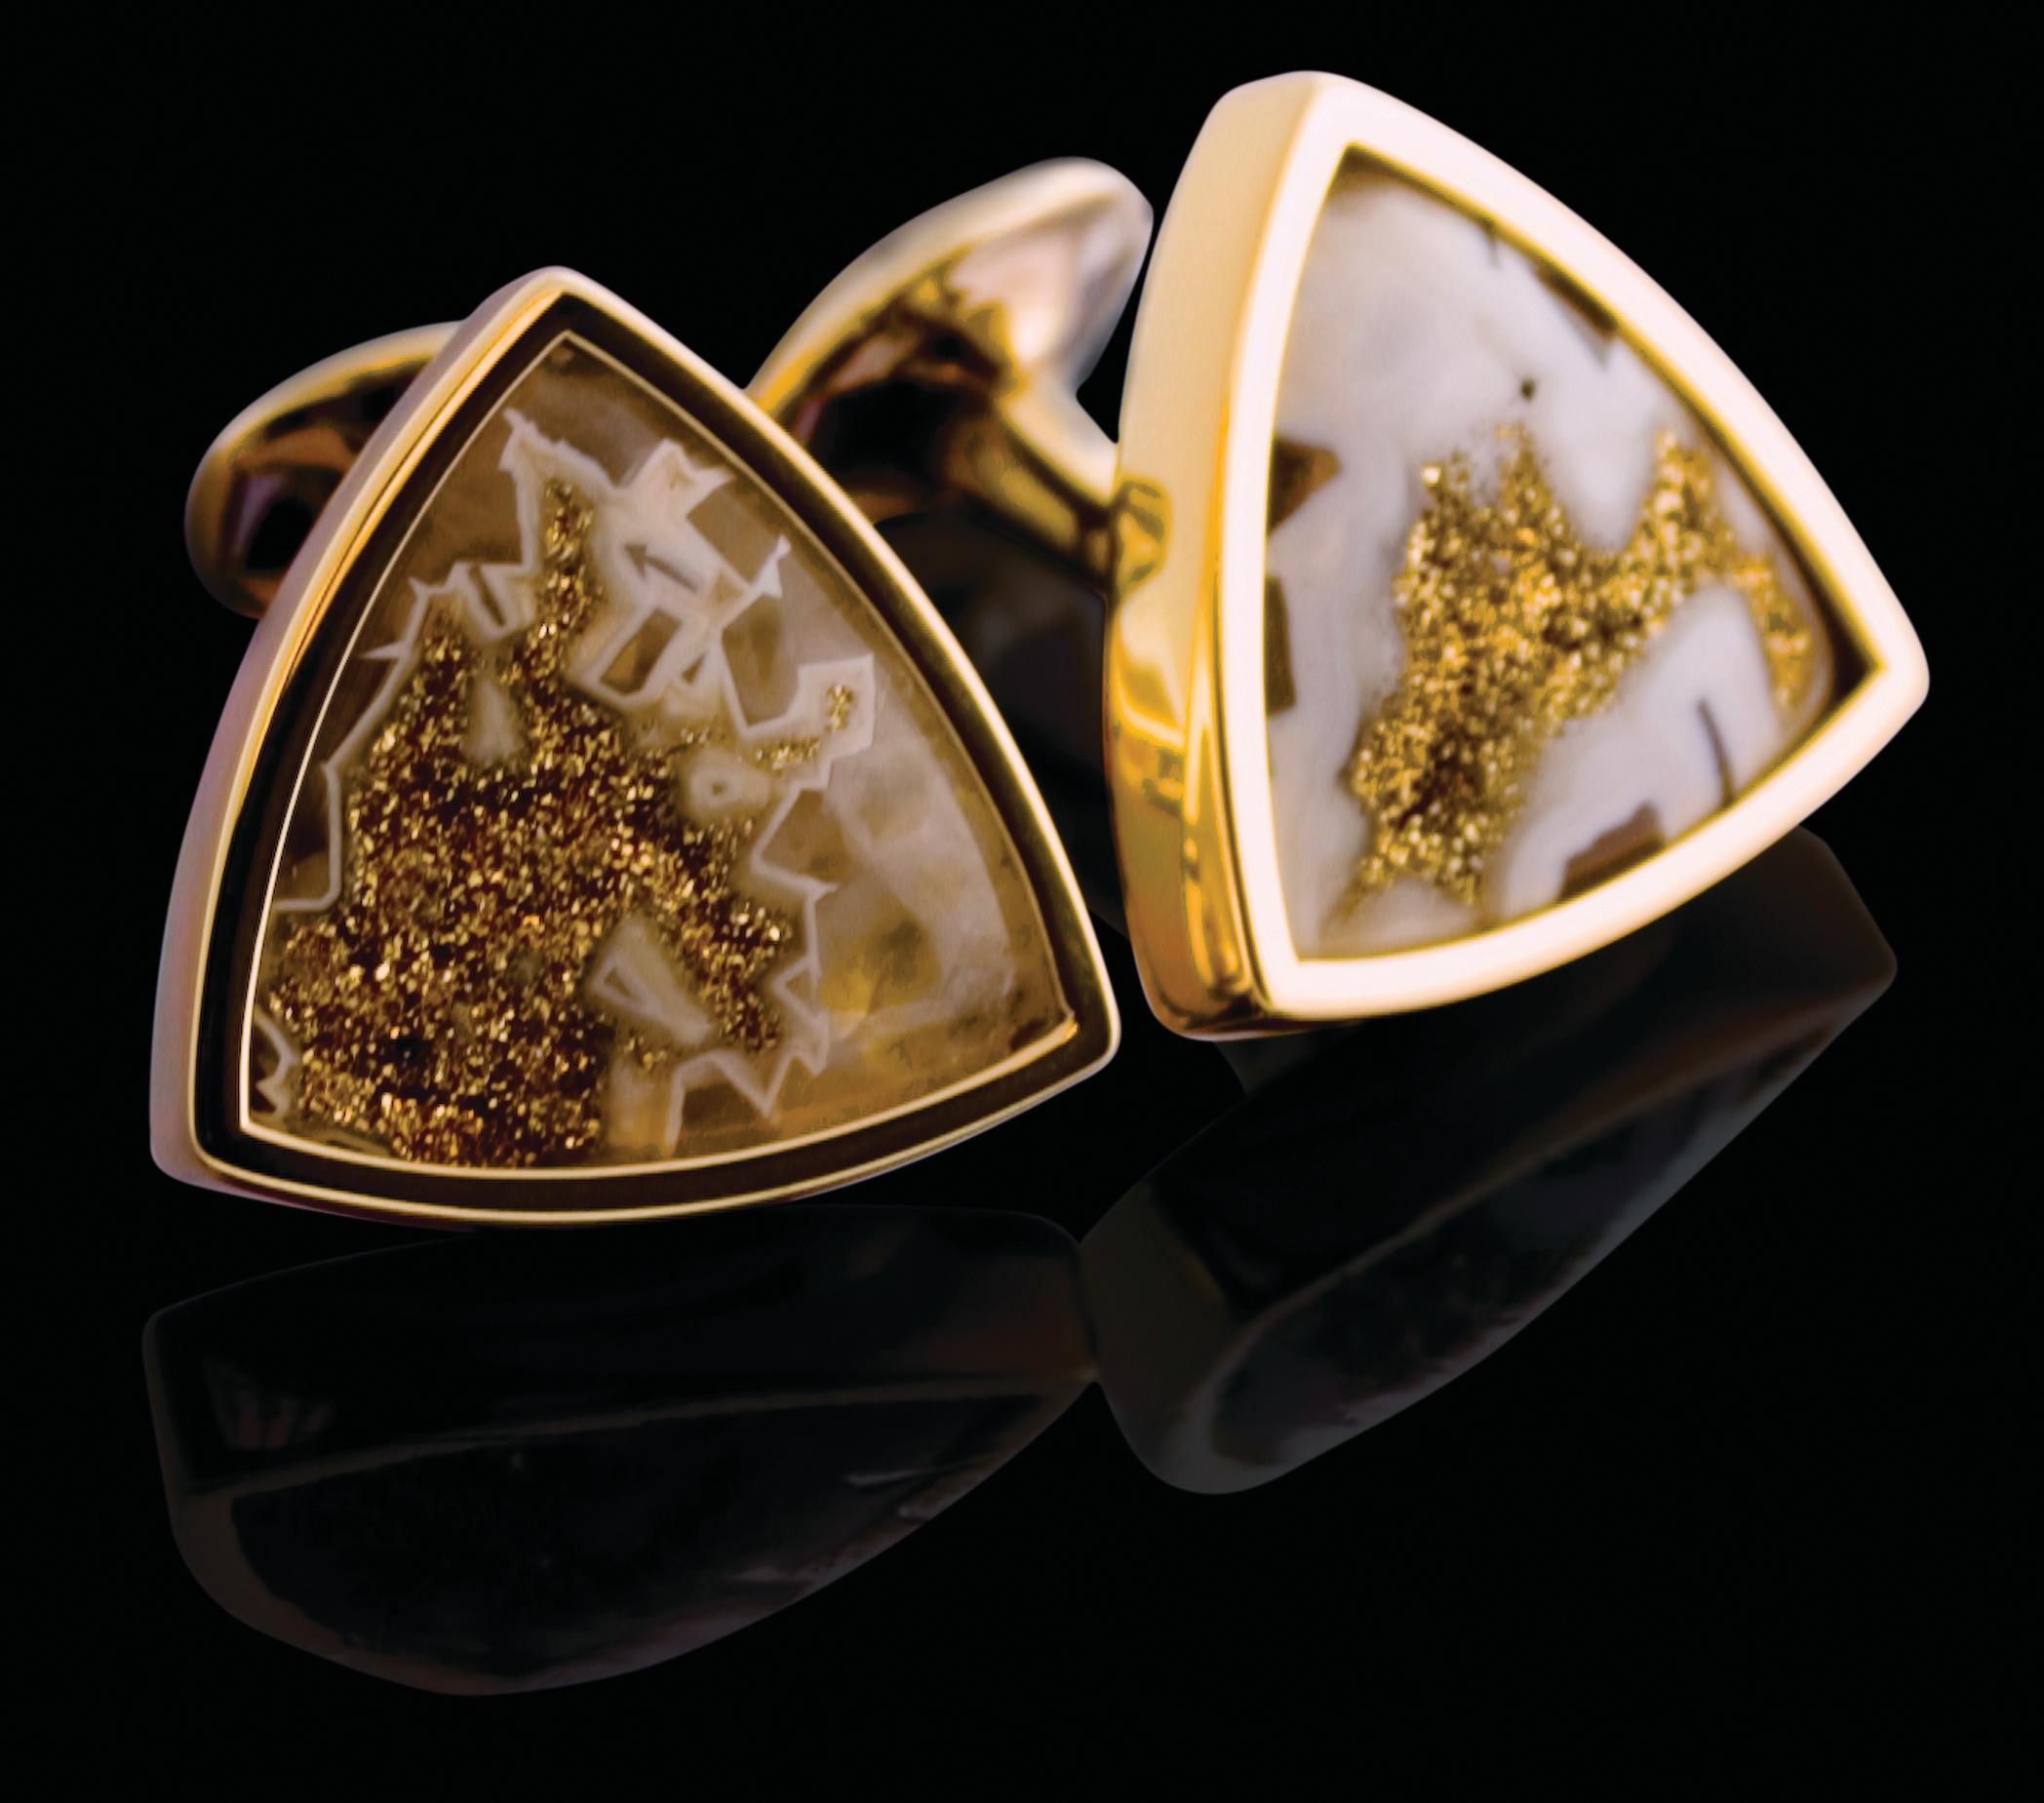 Tateossian London Cufflinks sourced in Brazil featuring Gold Valley Drusy (26.80ct) with a stunning triangular Yellow Gold setting.